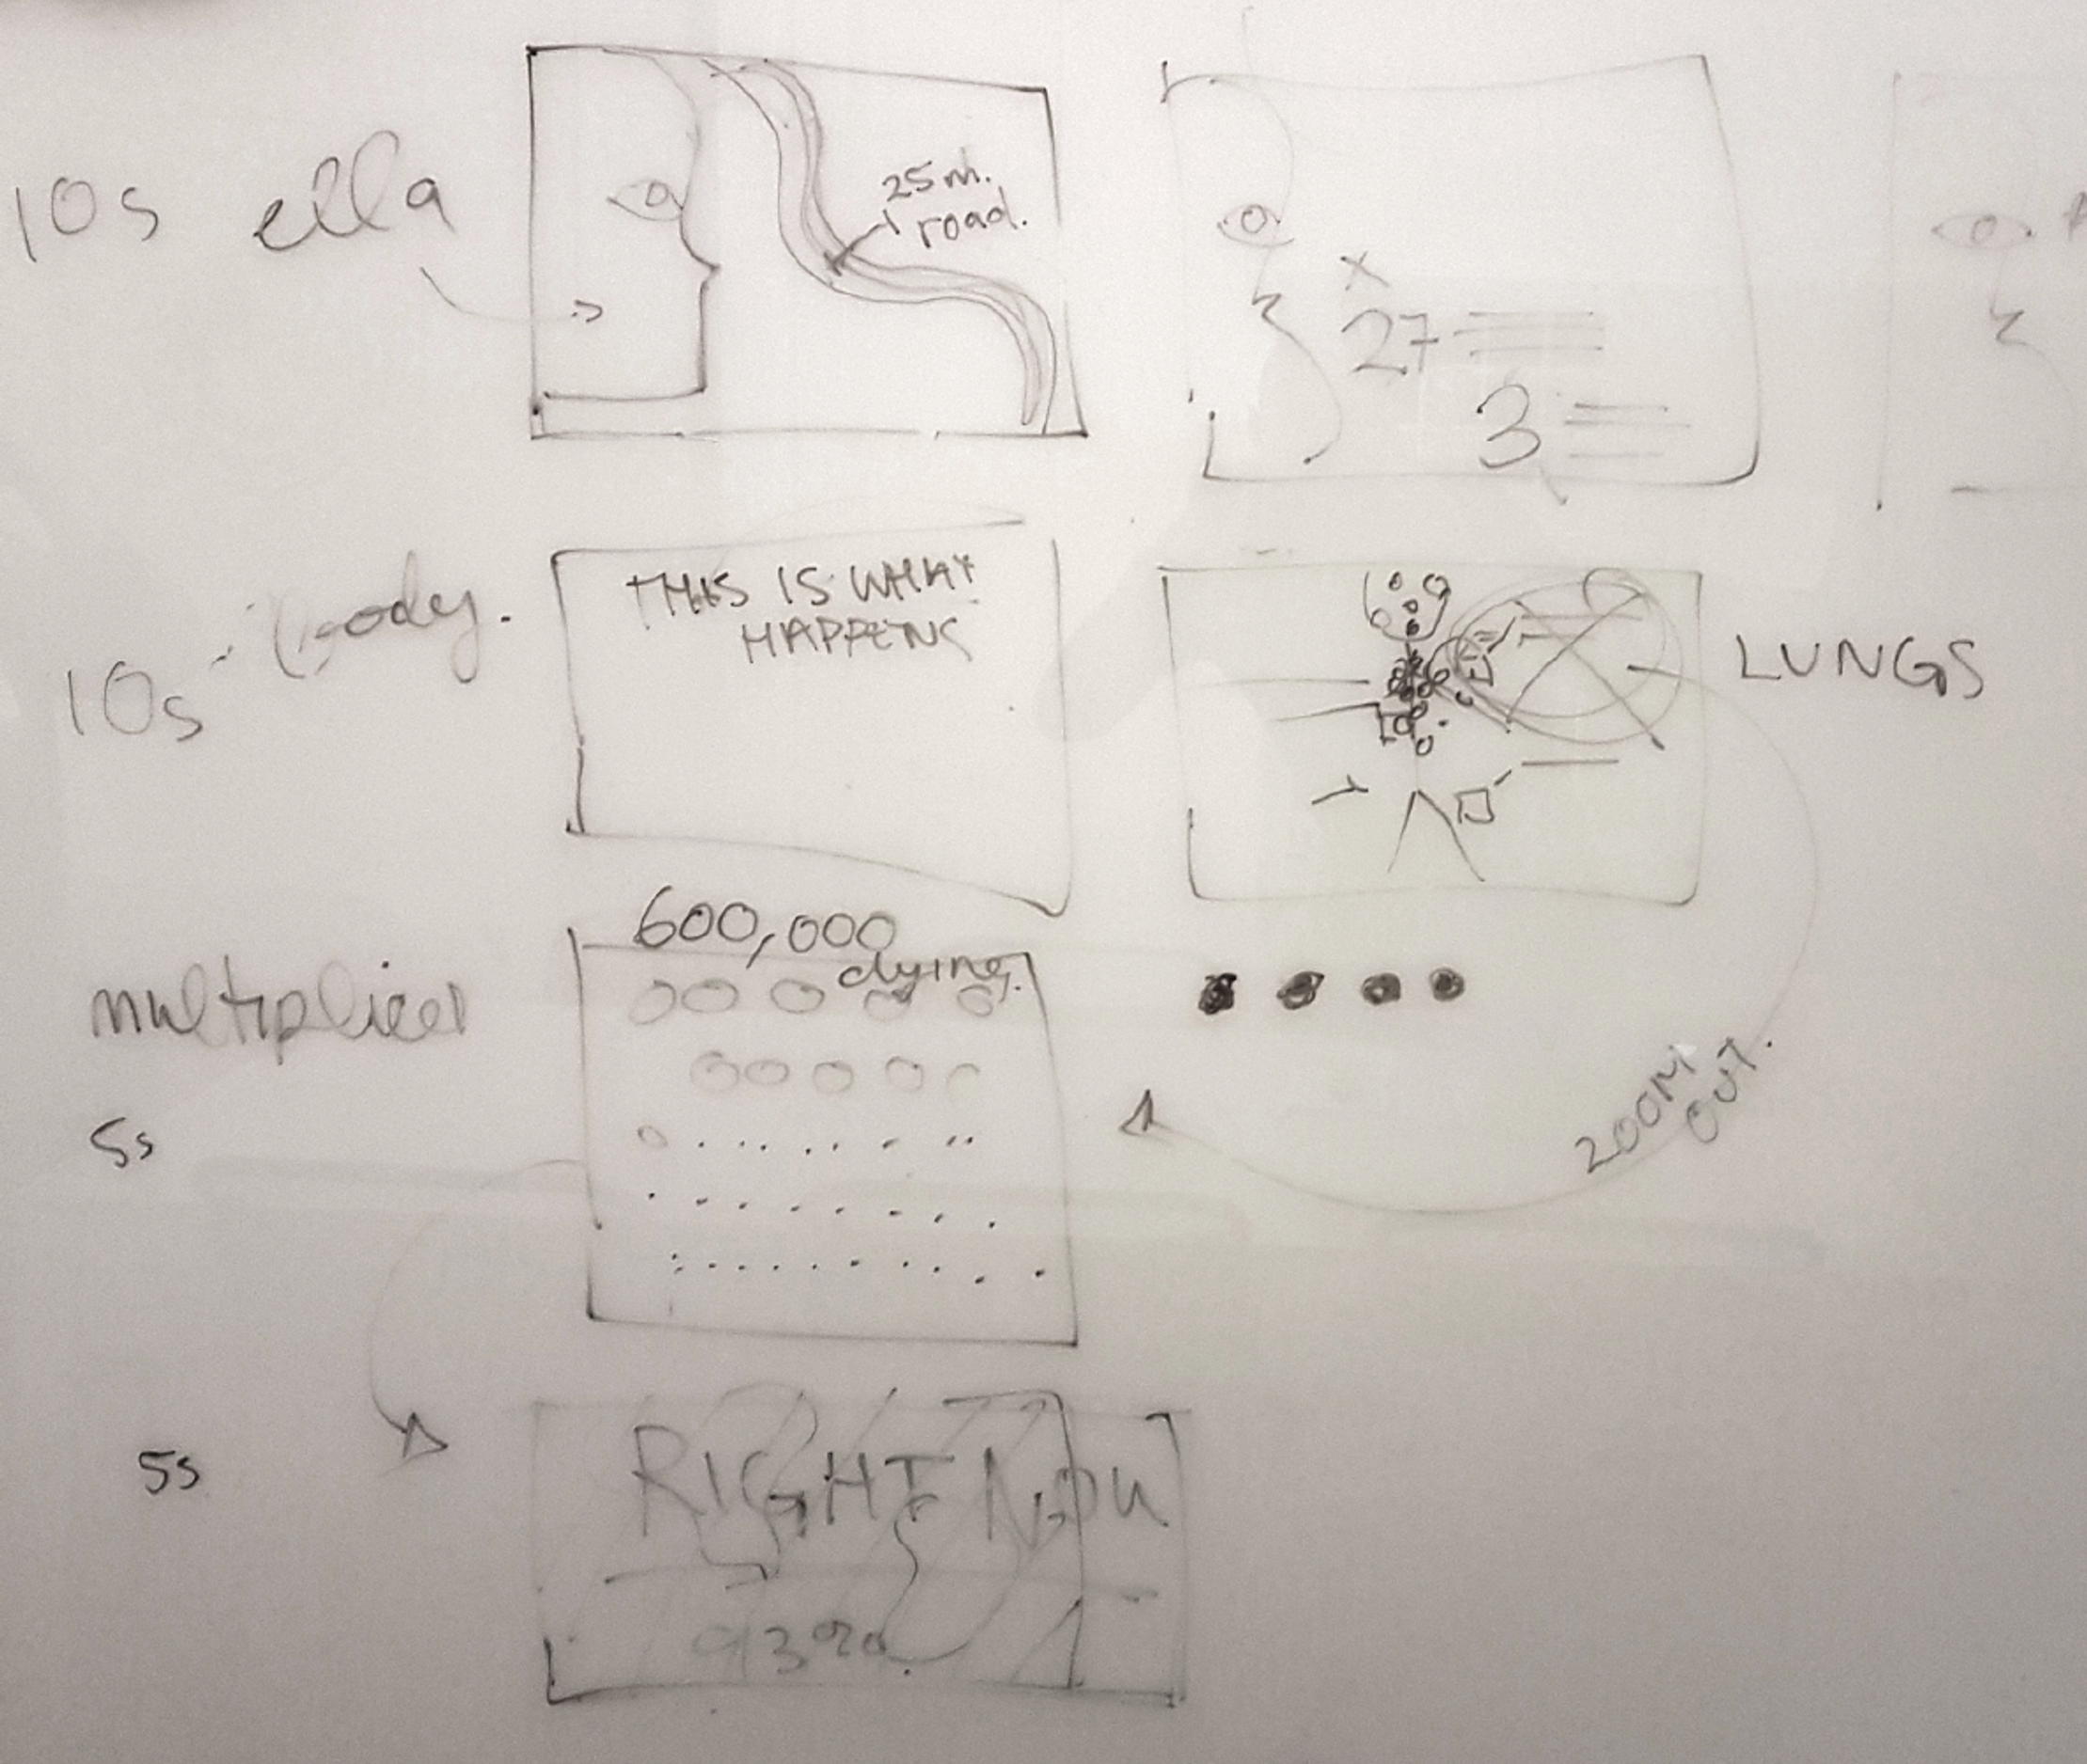 Whiteboard sketches of visual ideas for the This is Ella video.